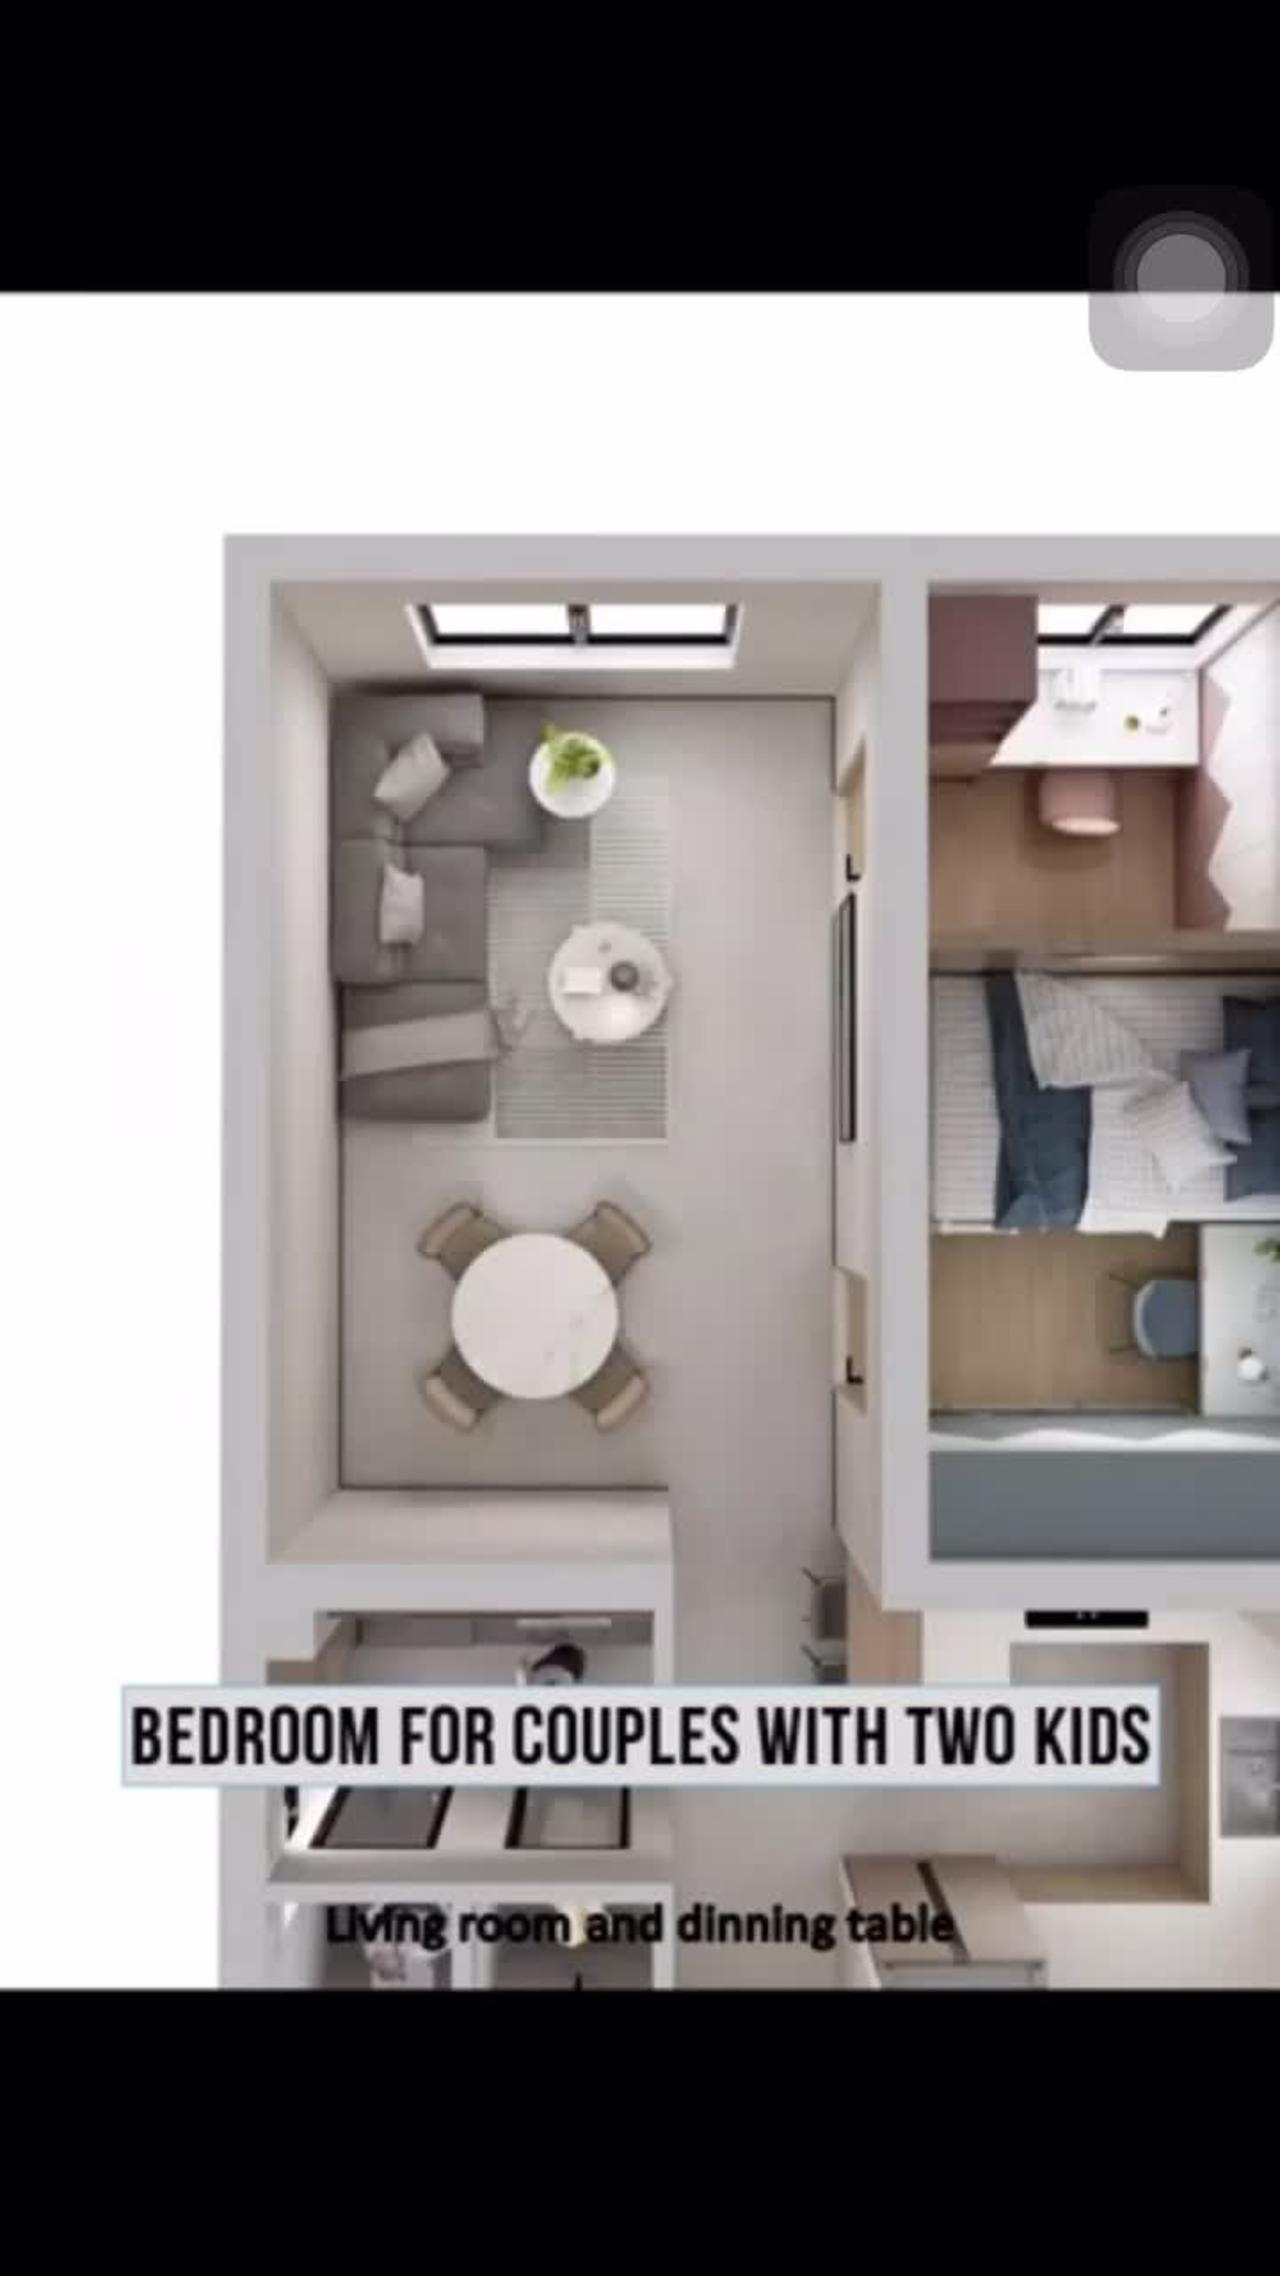 Bedroom design for kids - One News Page VIDEO